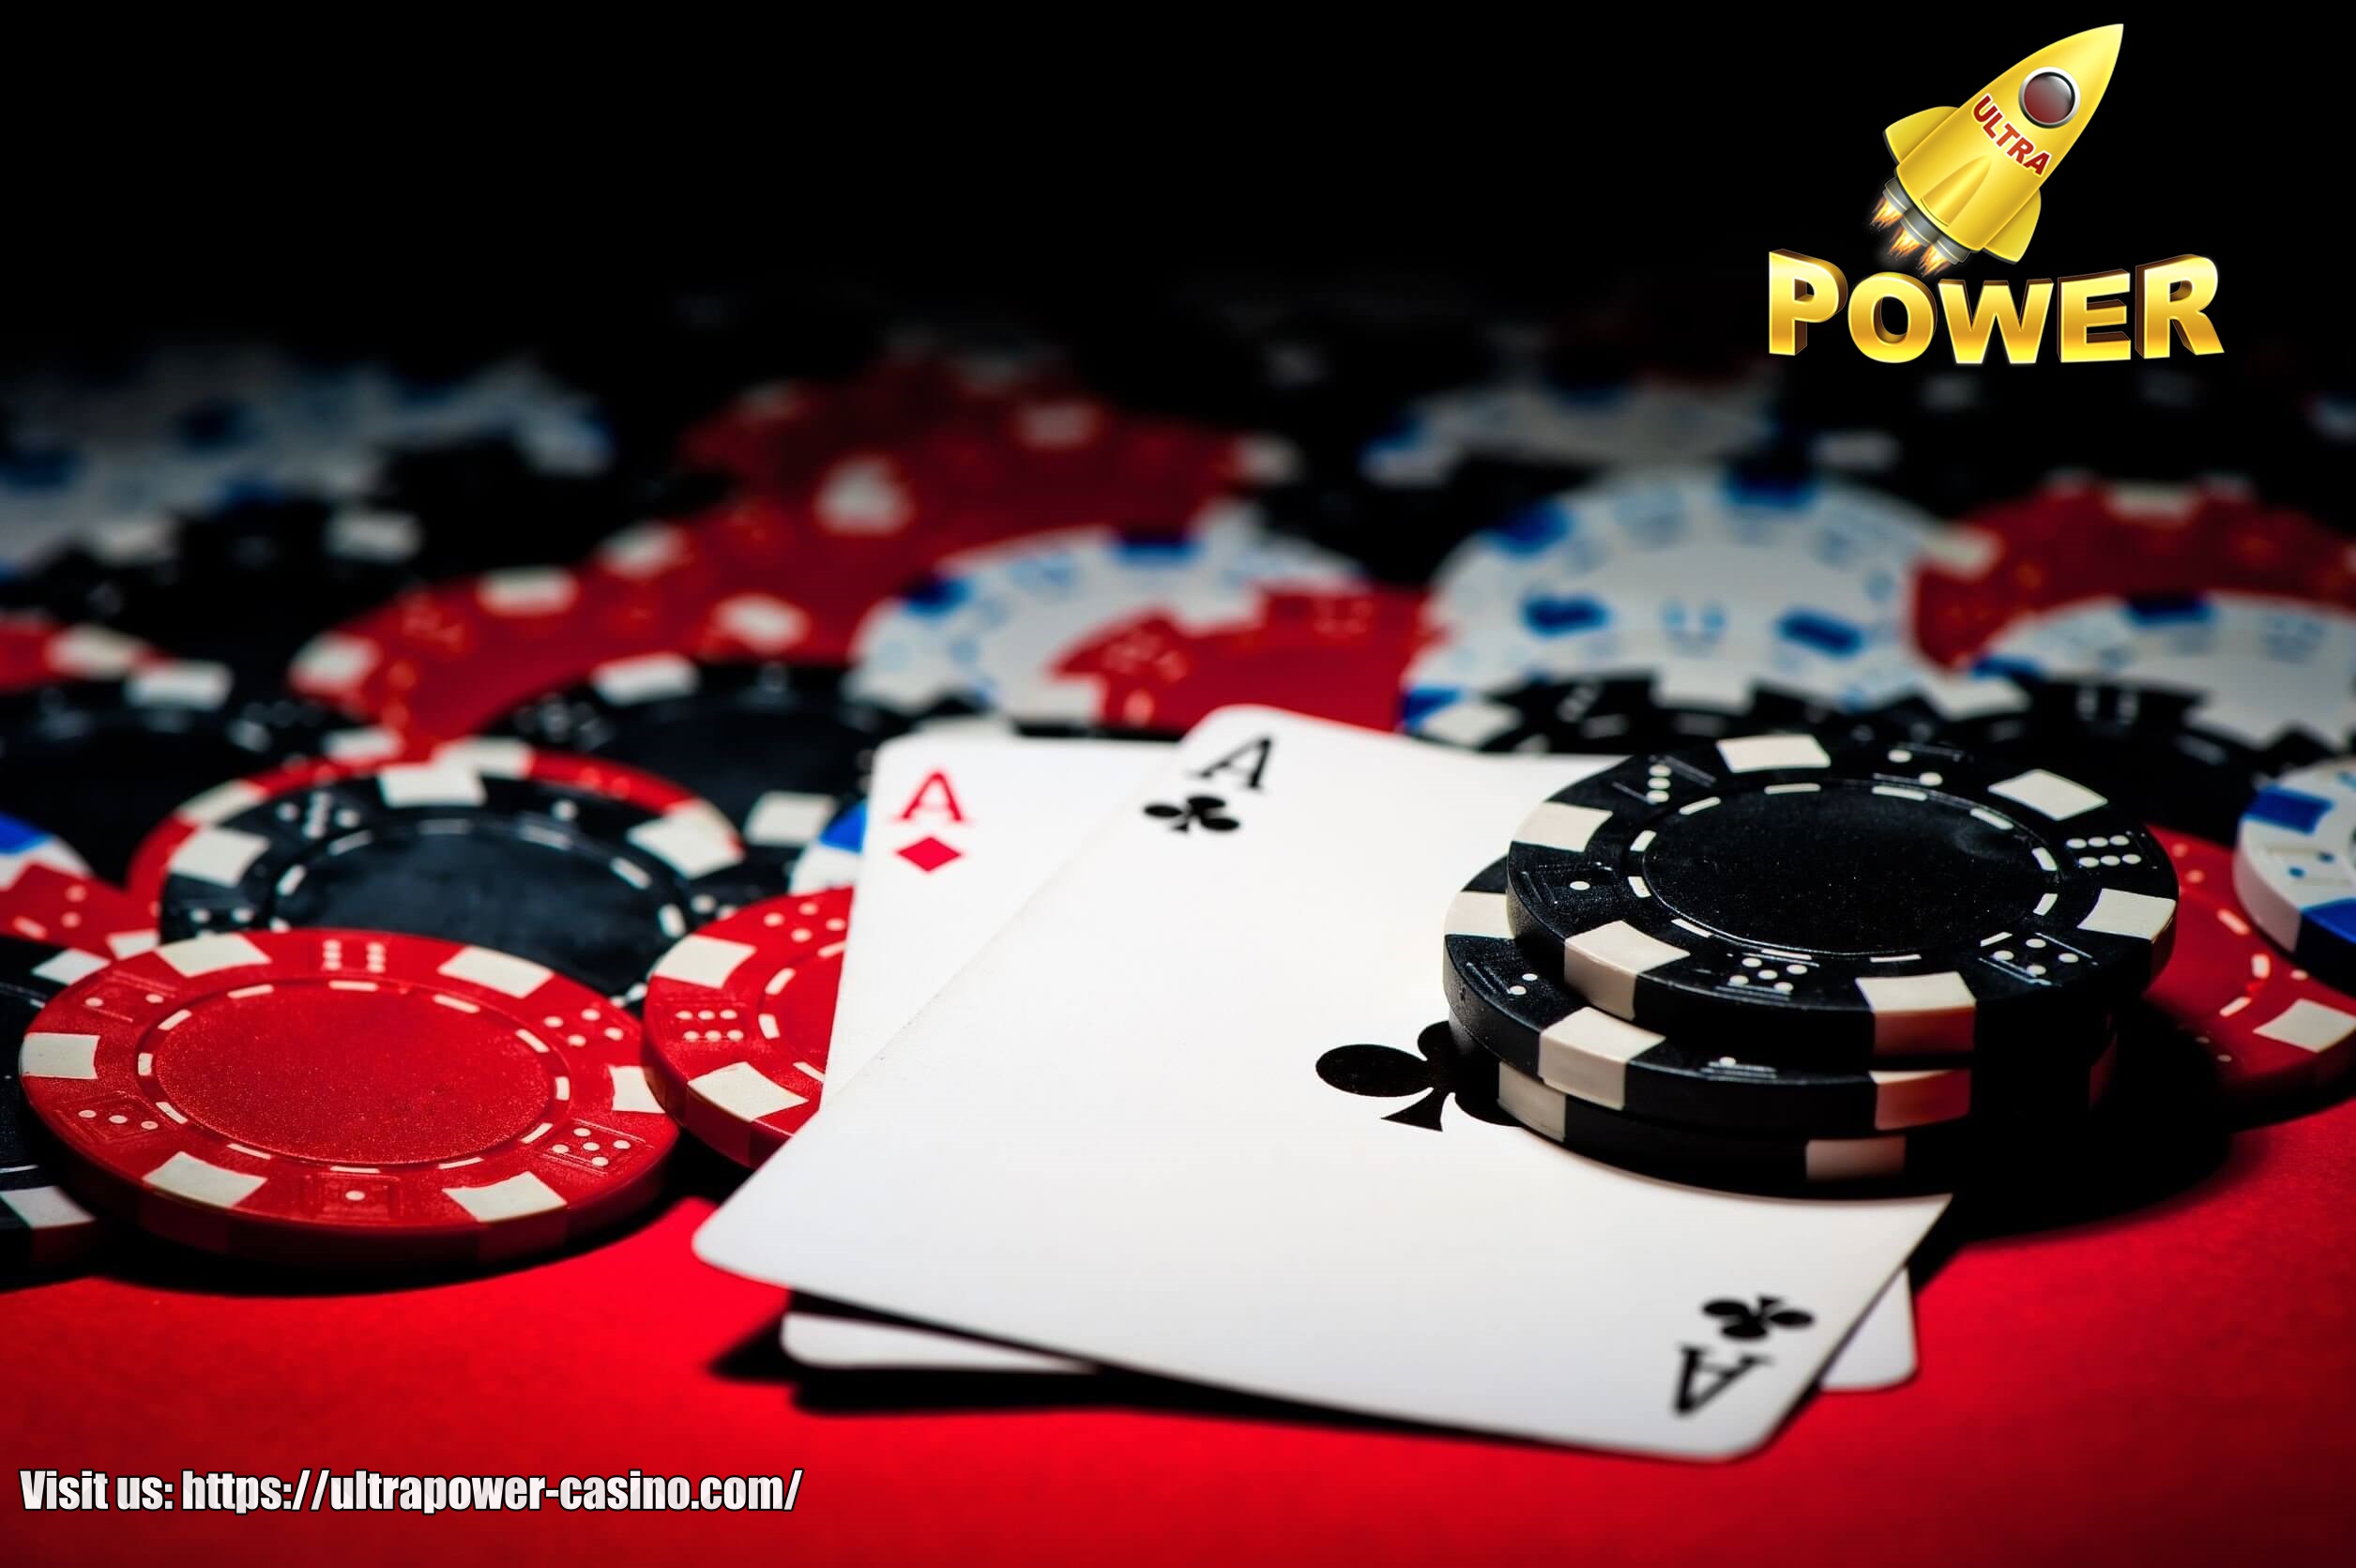 The Best Popular 5 Games at Ultrapower Casino